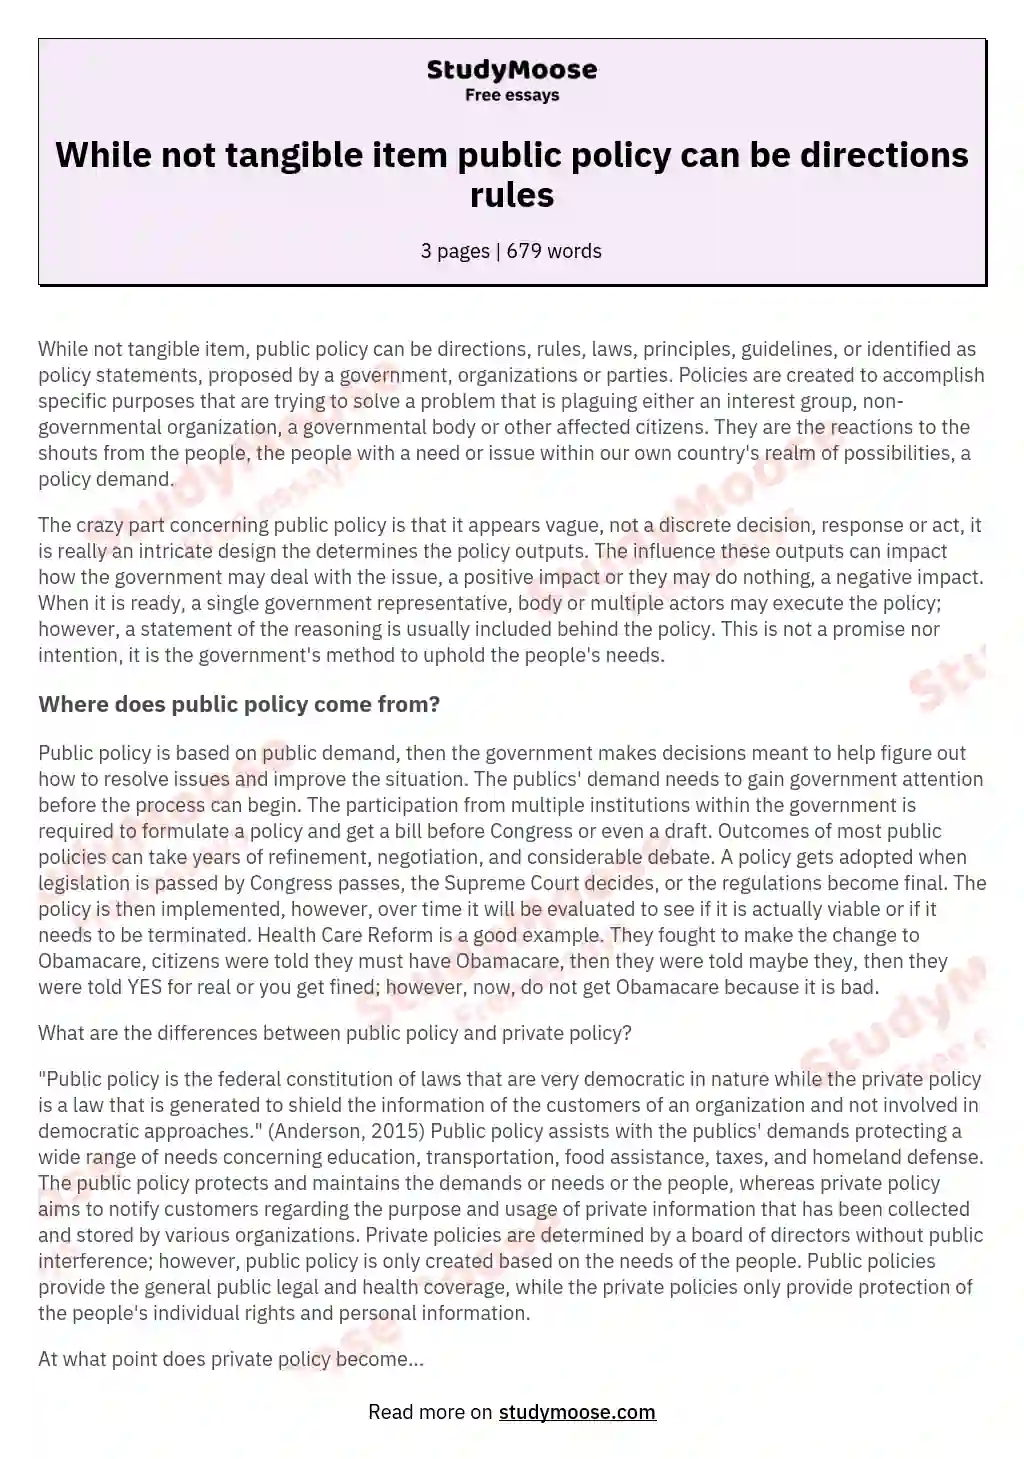 While not tangible item public policy can be directions rules essay